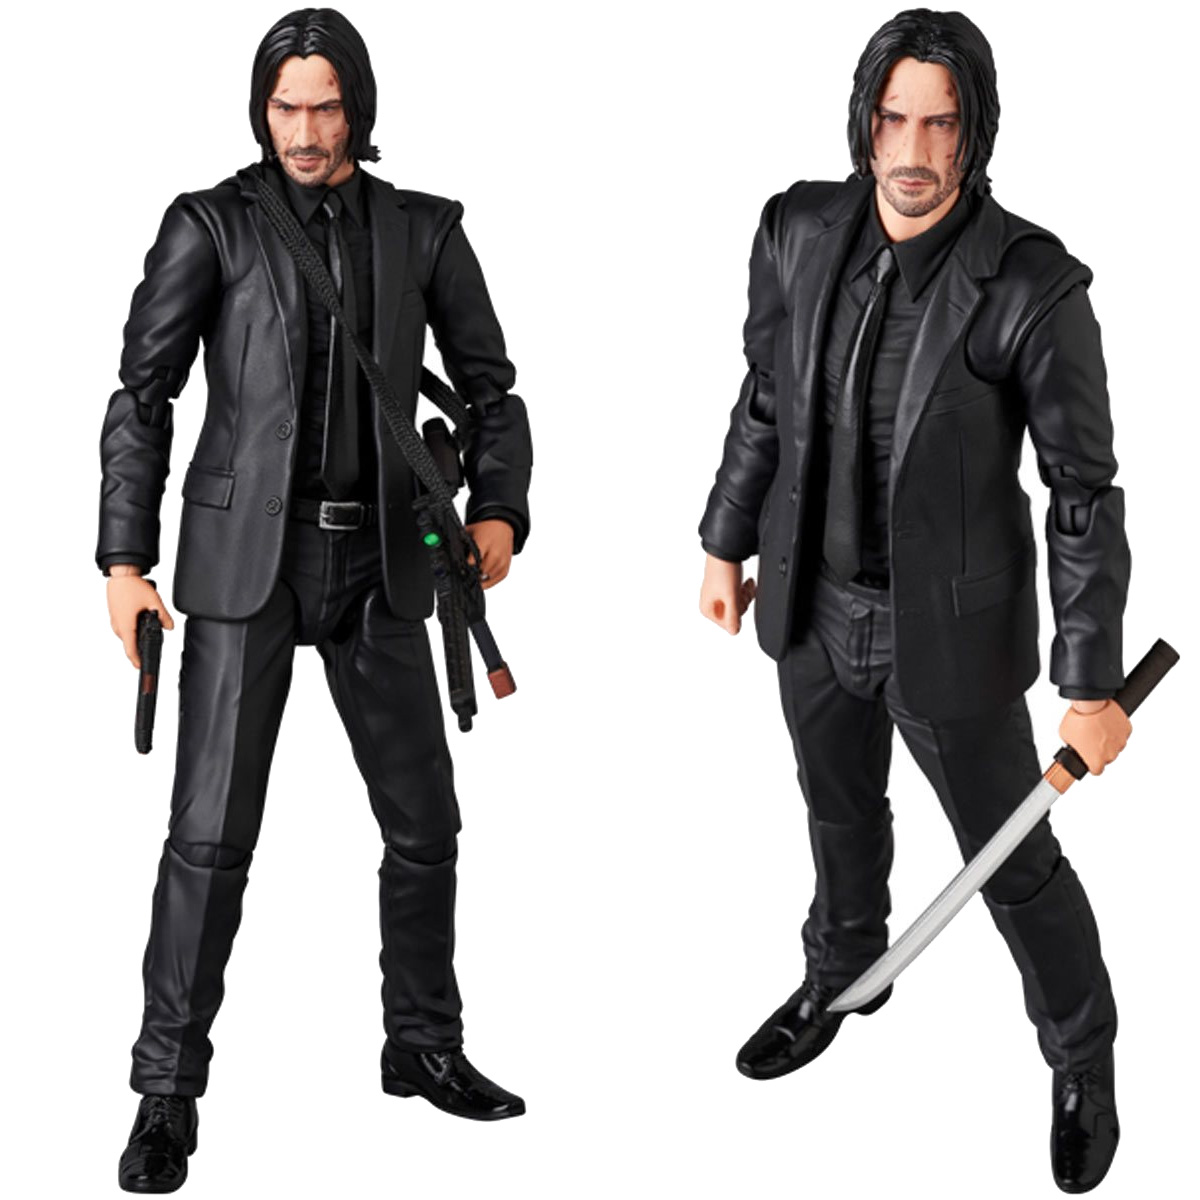 Action Figures MAFEX John Wick (Chapter 3) e Caine (Chapter 4)